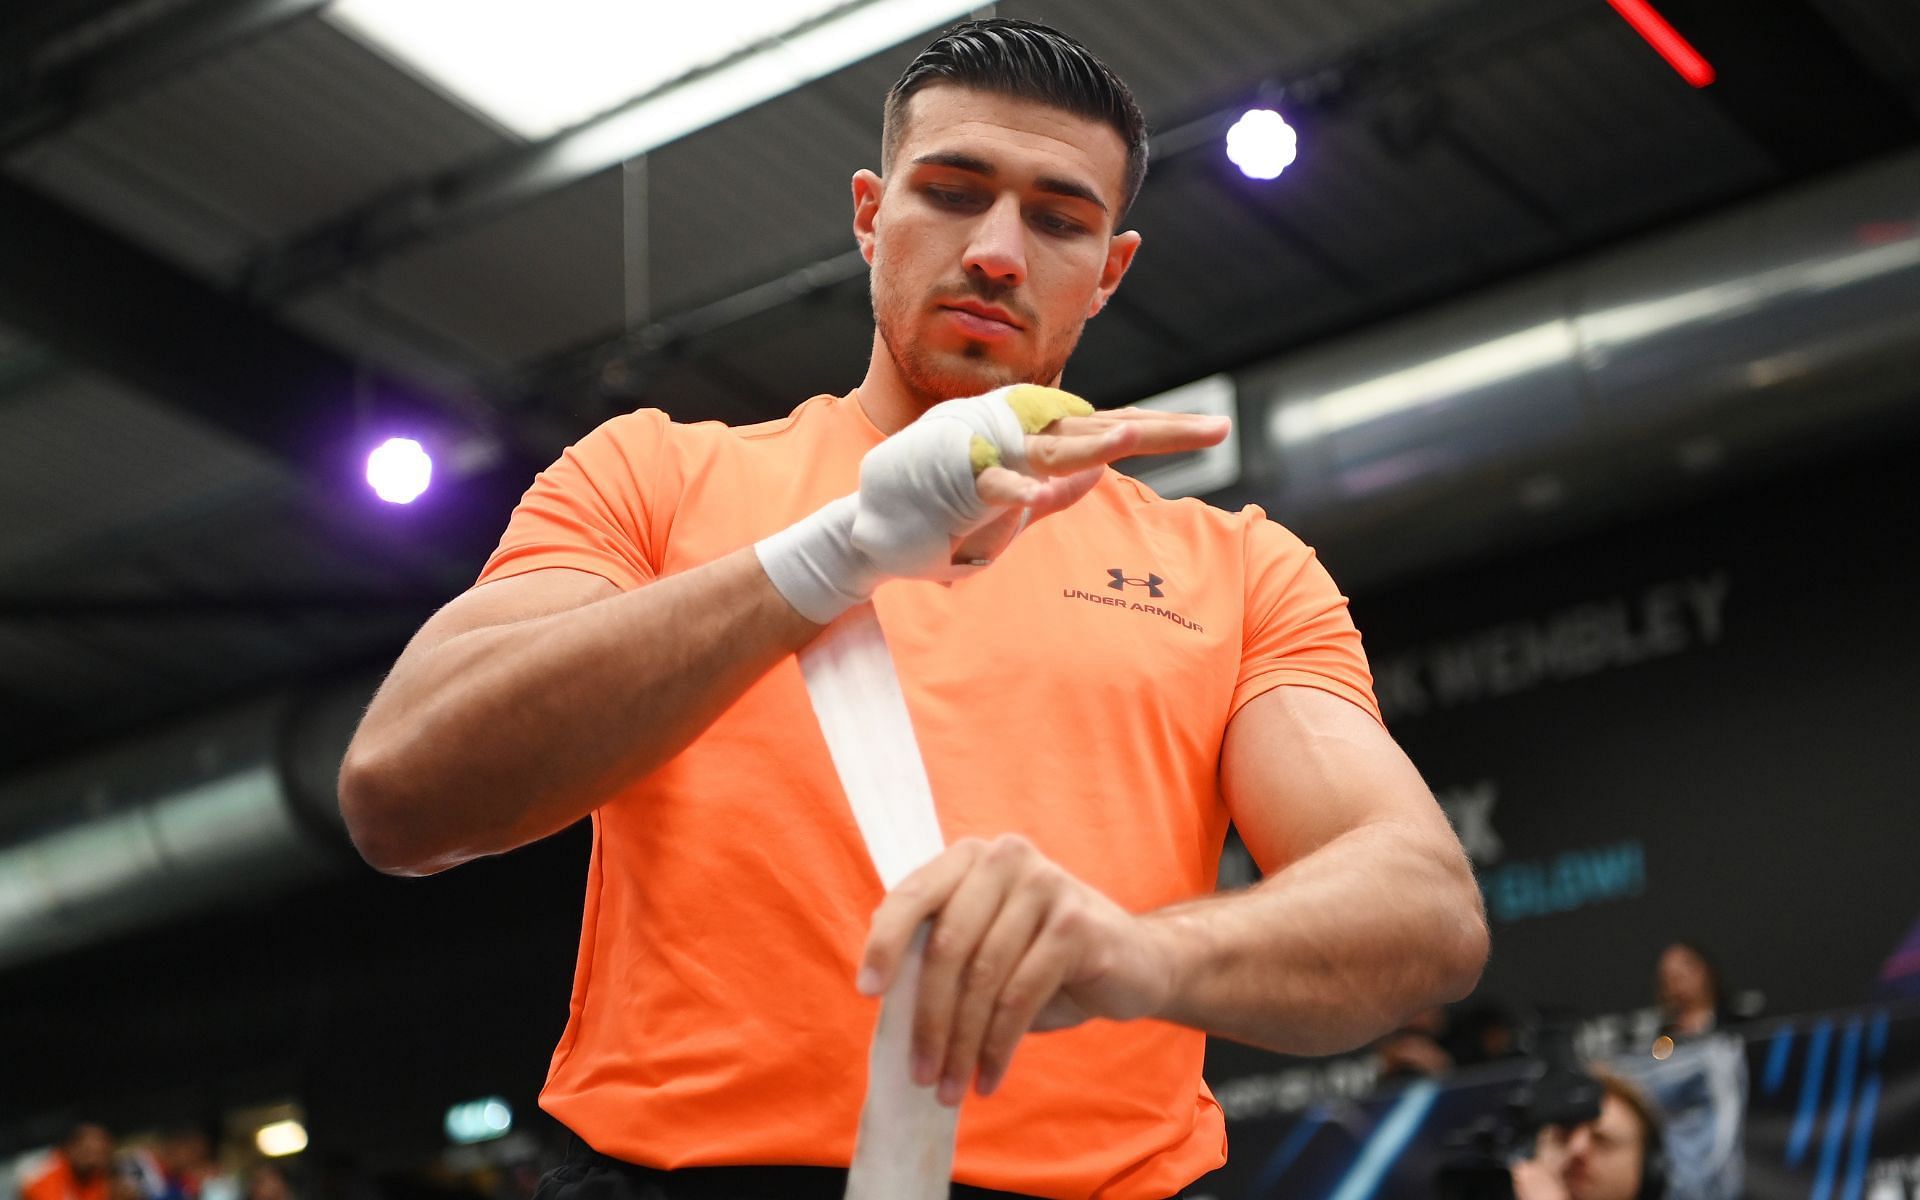 Boxer Tommy Fury (inset) has received extensive guidance from his Fury family mentors and is known to meticulously wrap his hands for training and fights [Image courtesy: Getty Images]